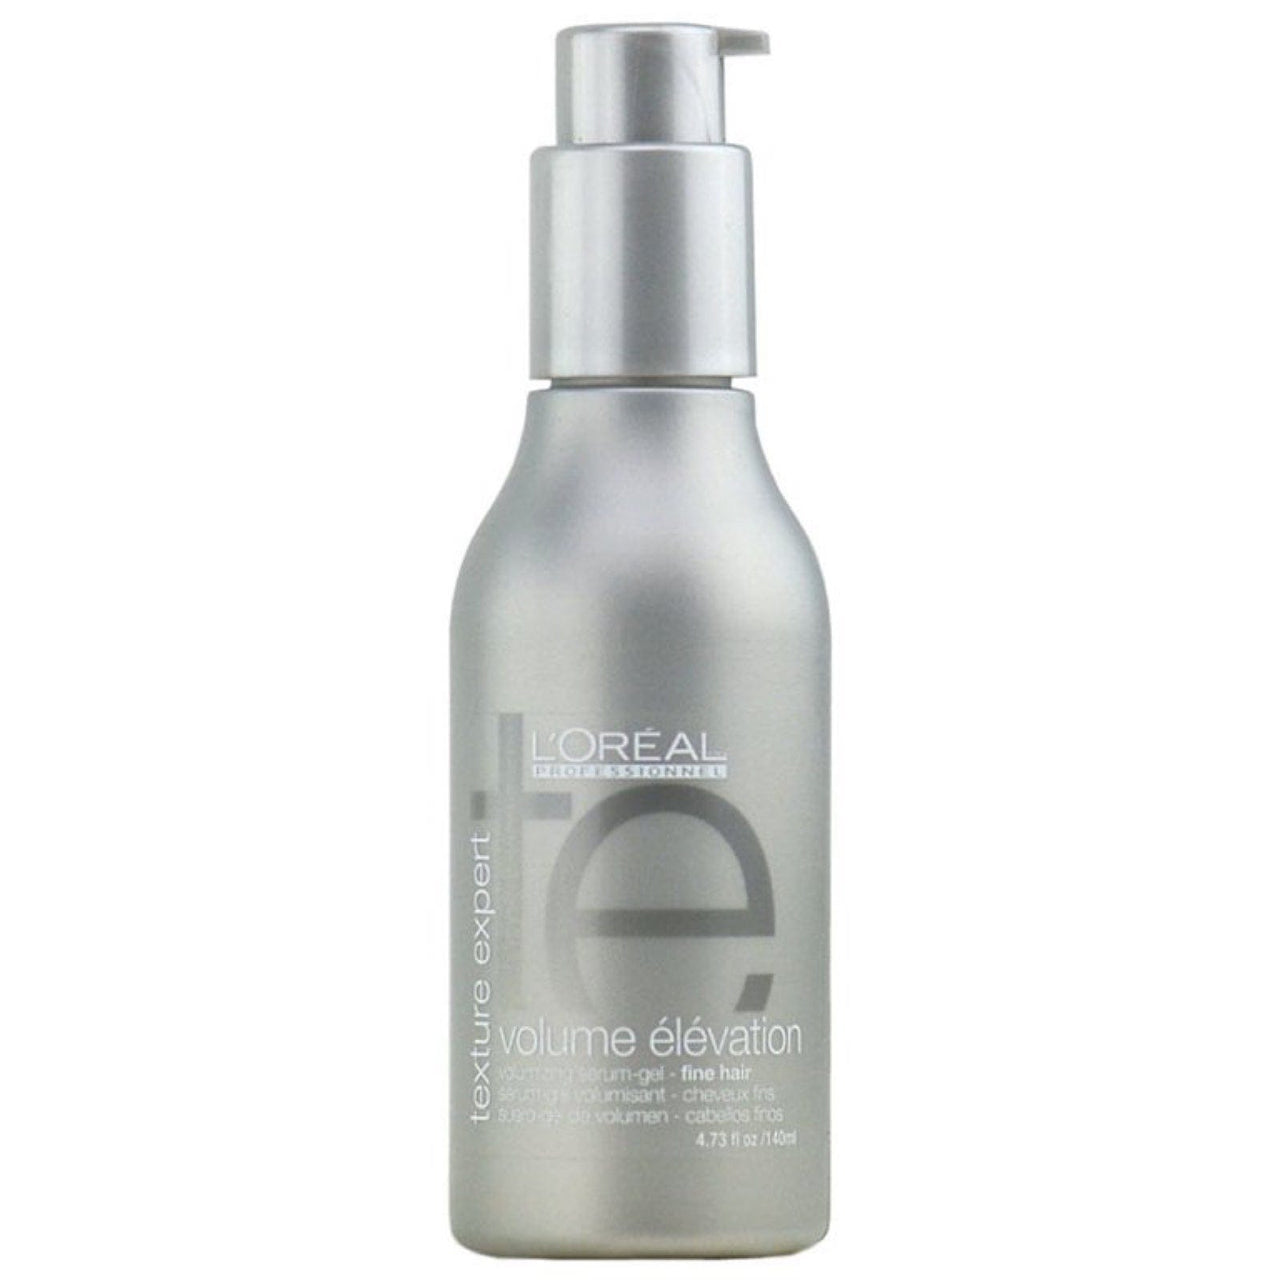 L'OREAL PROFESSIONNEL_Texture Expert Volume Elevation 140ml_Cosmetic World